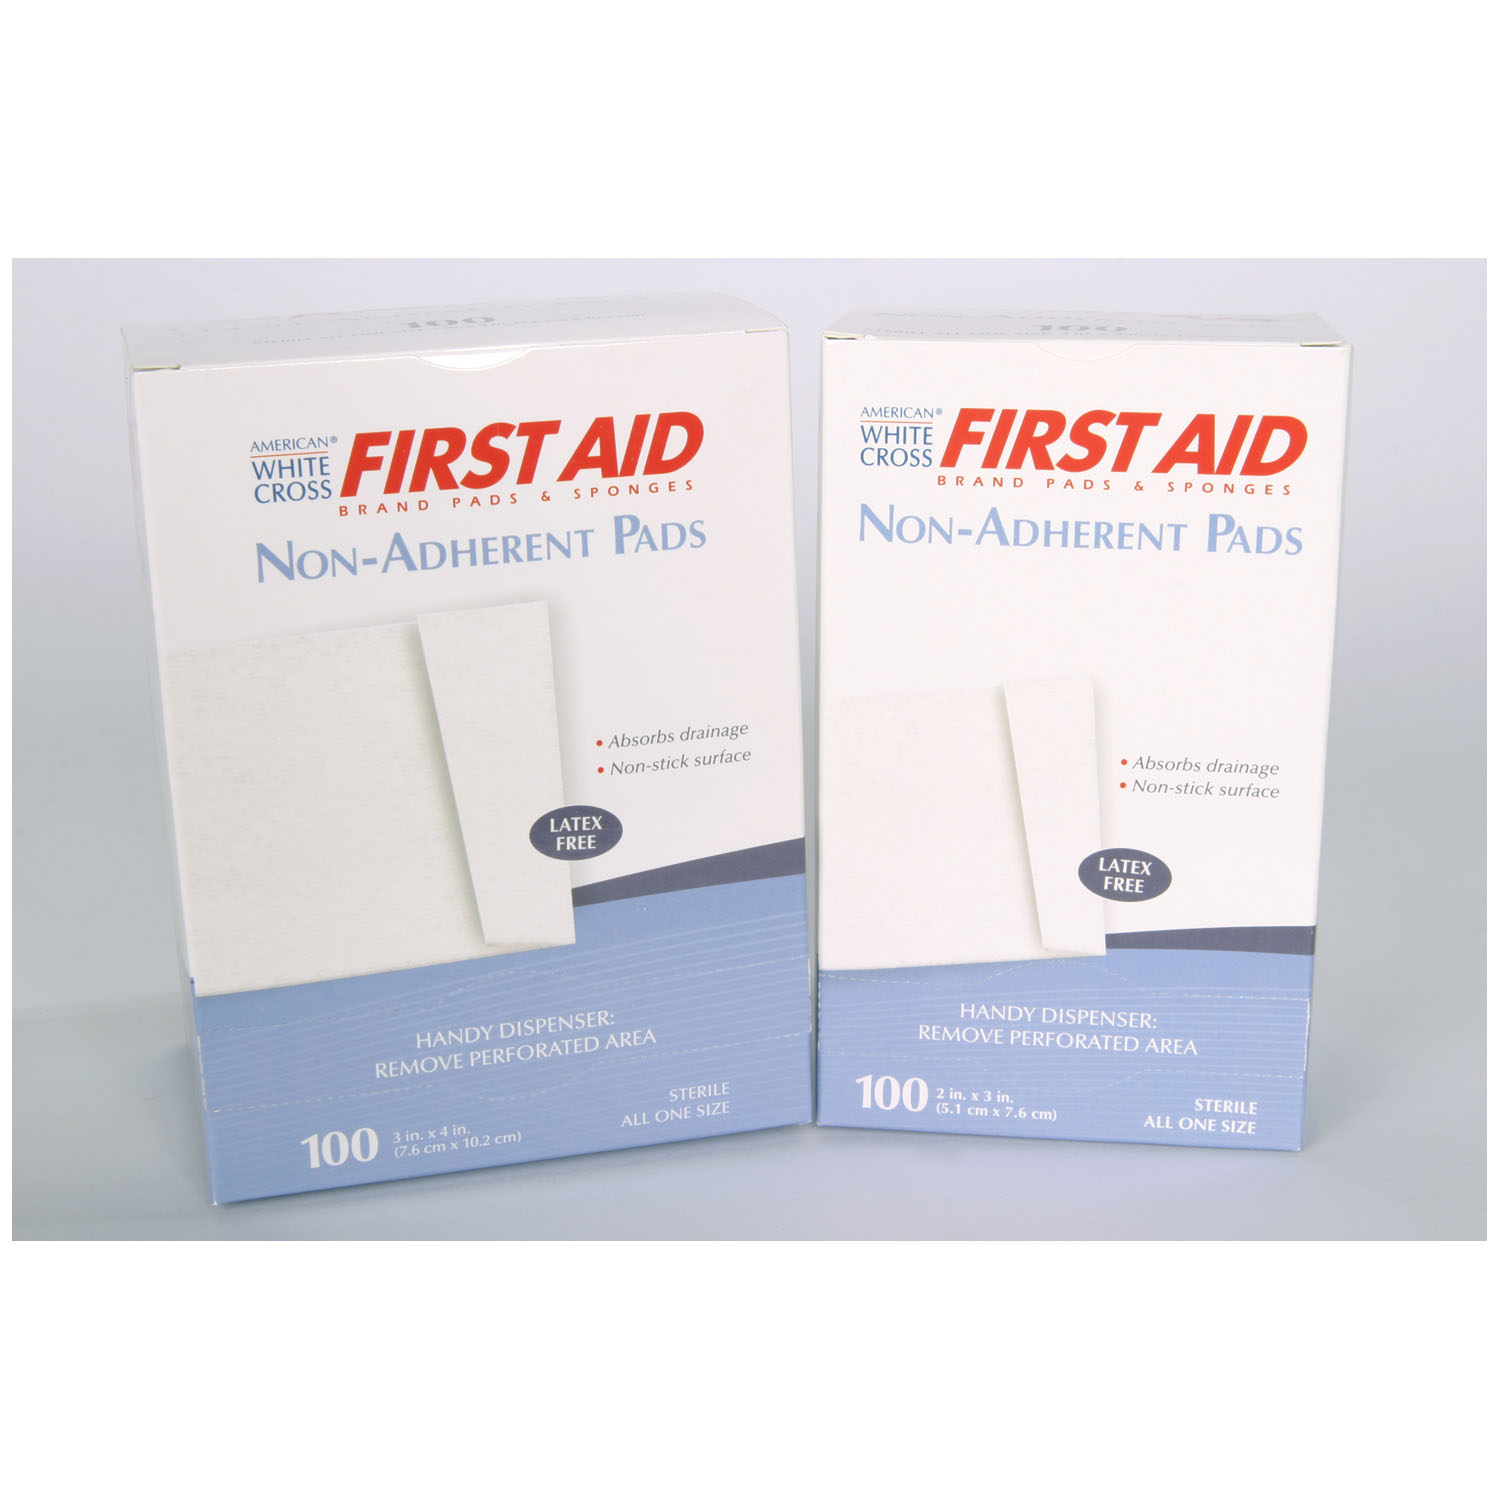 DUKAL NON-ADHERENT STERILE PADS : 7575033 BX      $10.43 Stocked